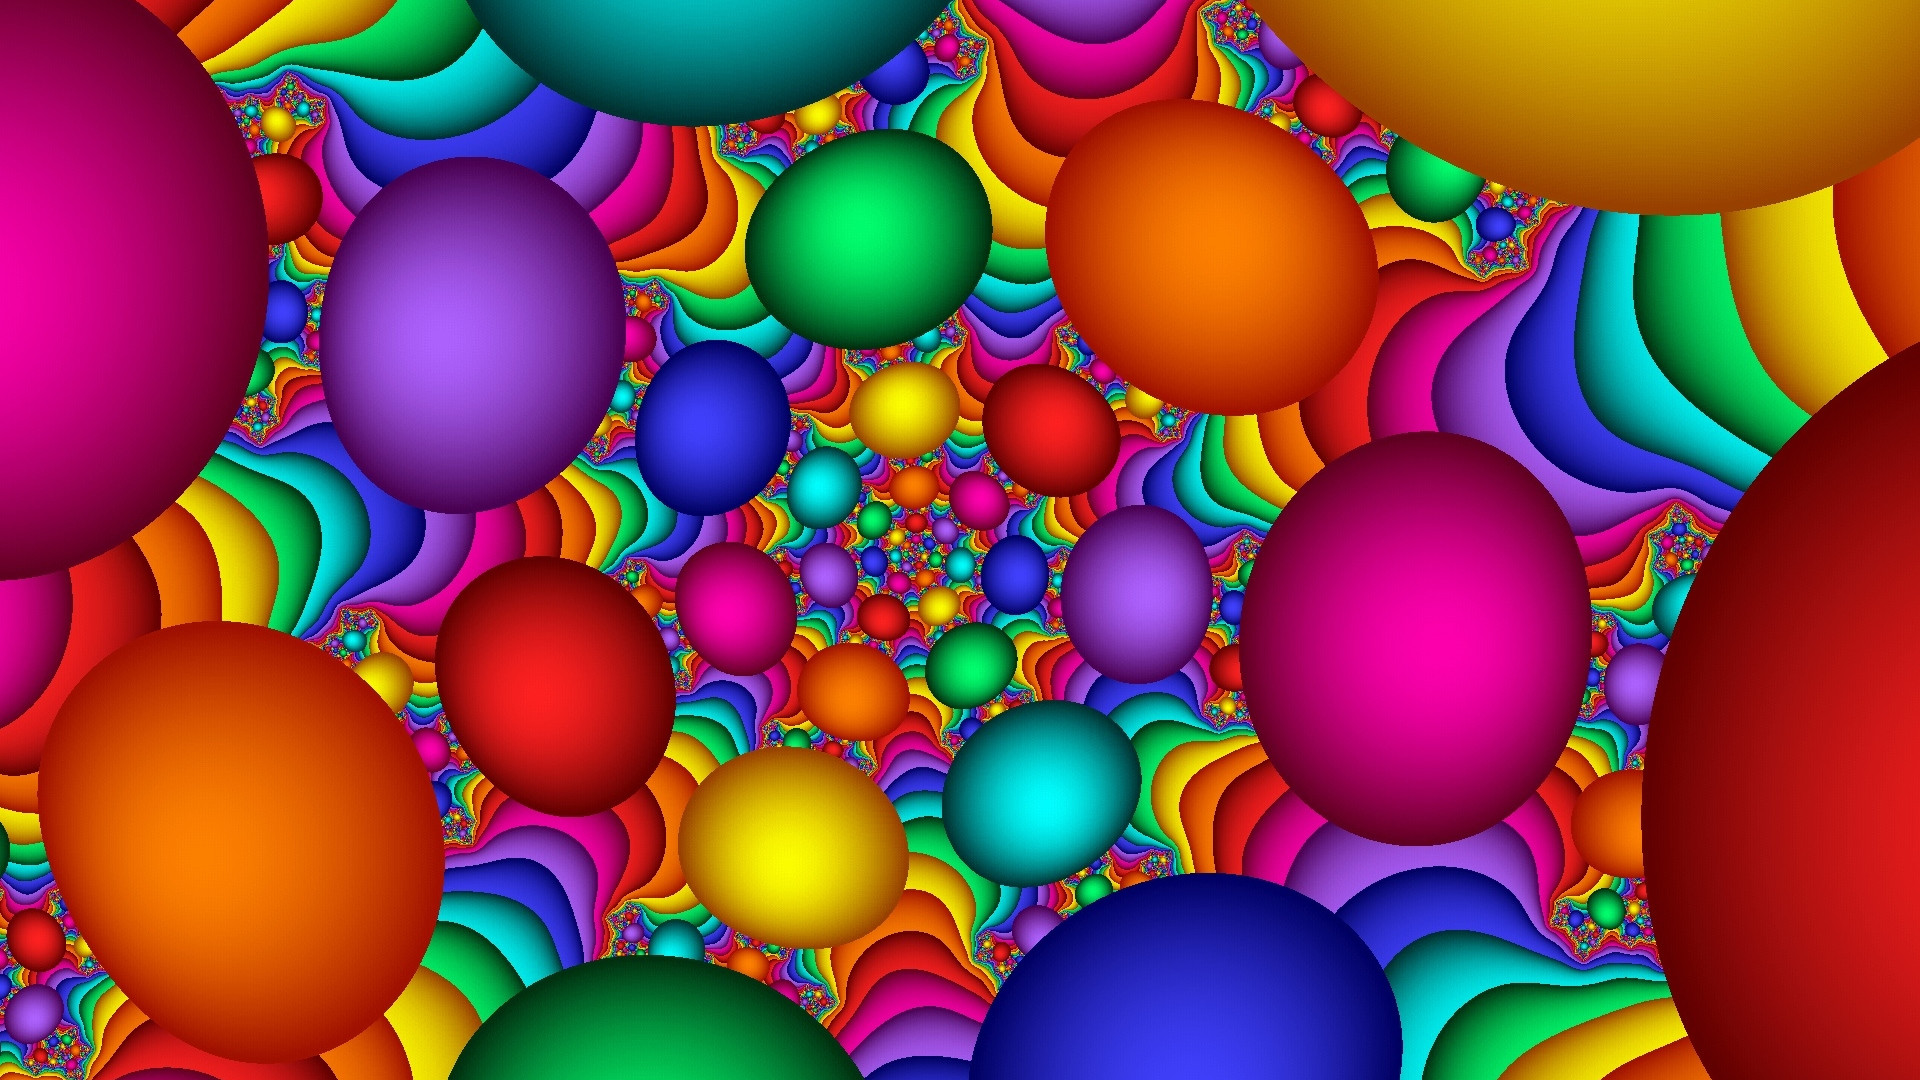 1920x1080  Wallpaper balloons, colorful, background, bright